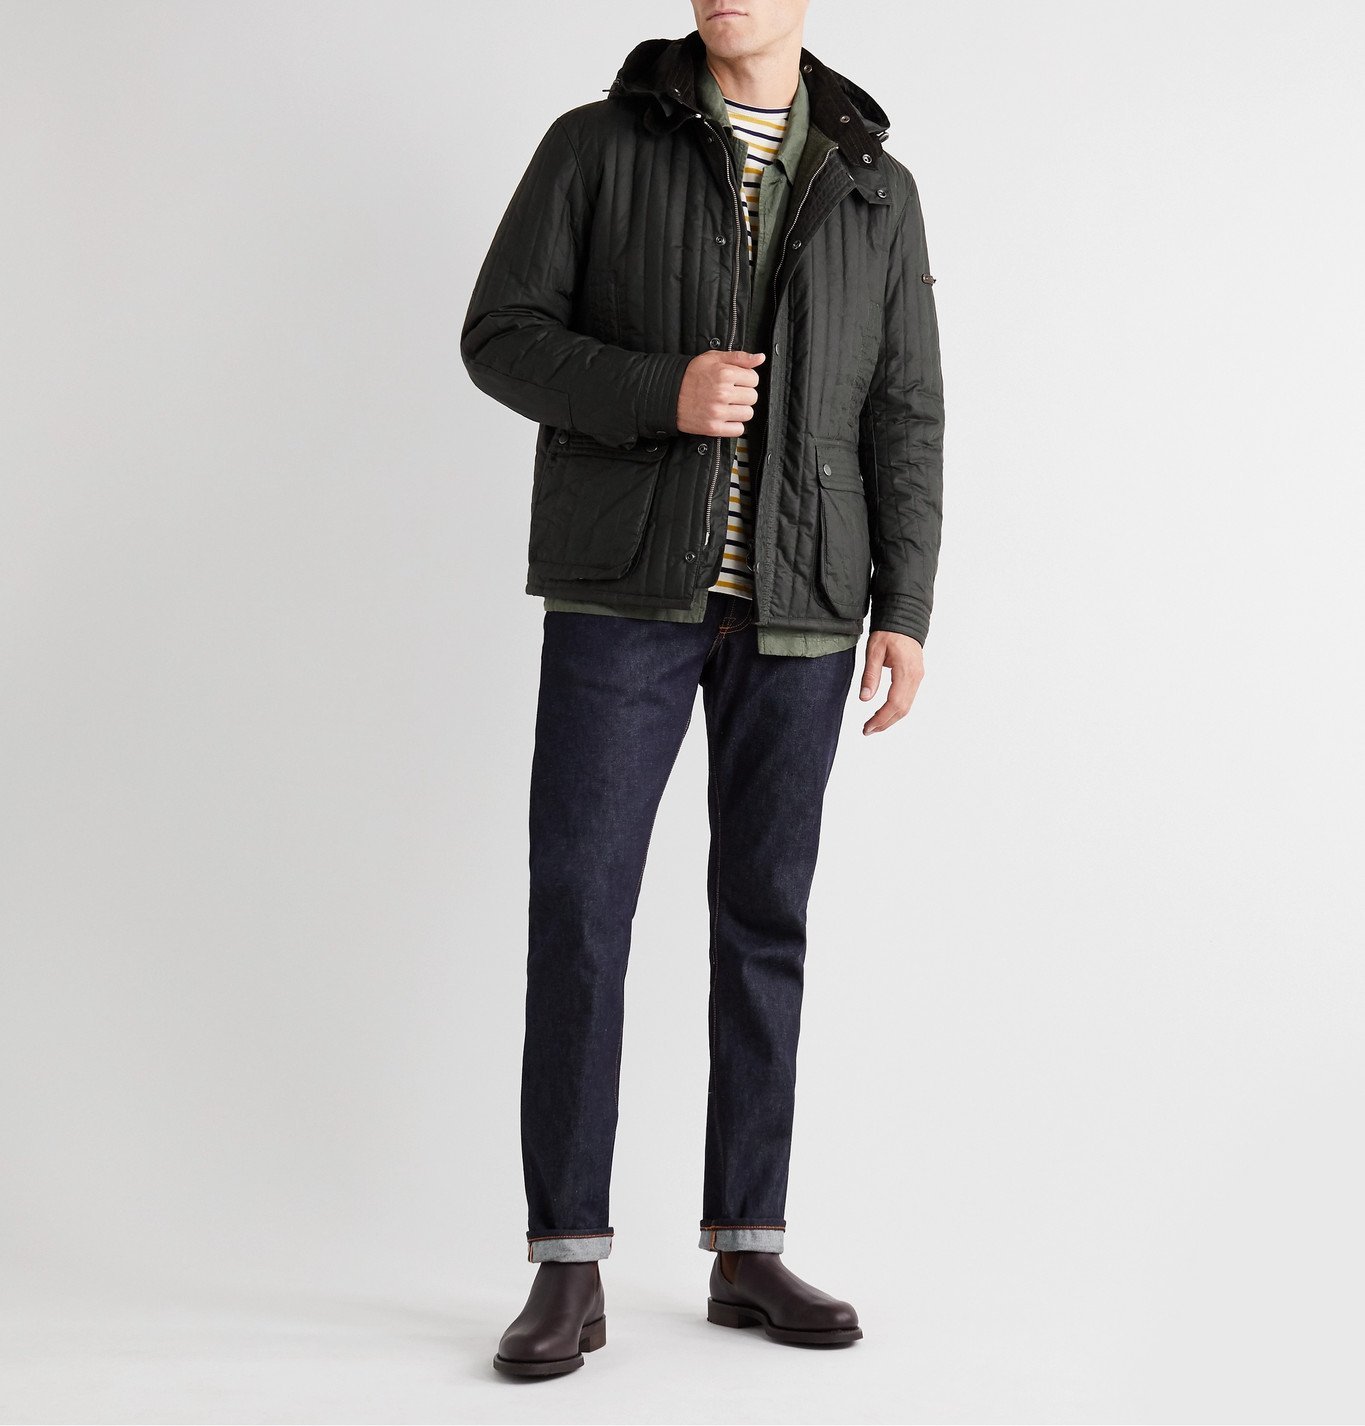 Barbour Gold Standard - Supa-Convertible Padded Quilted Waxed-Cotton Jacket - Black